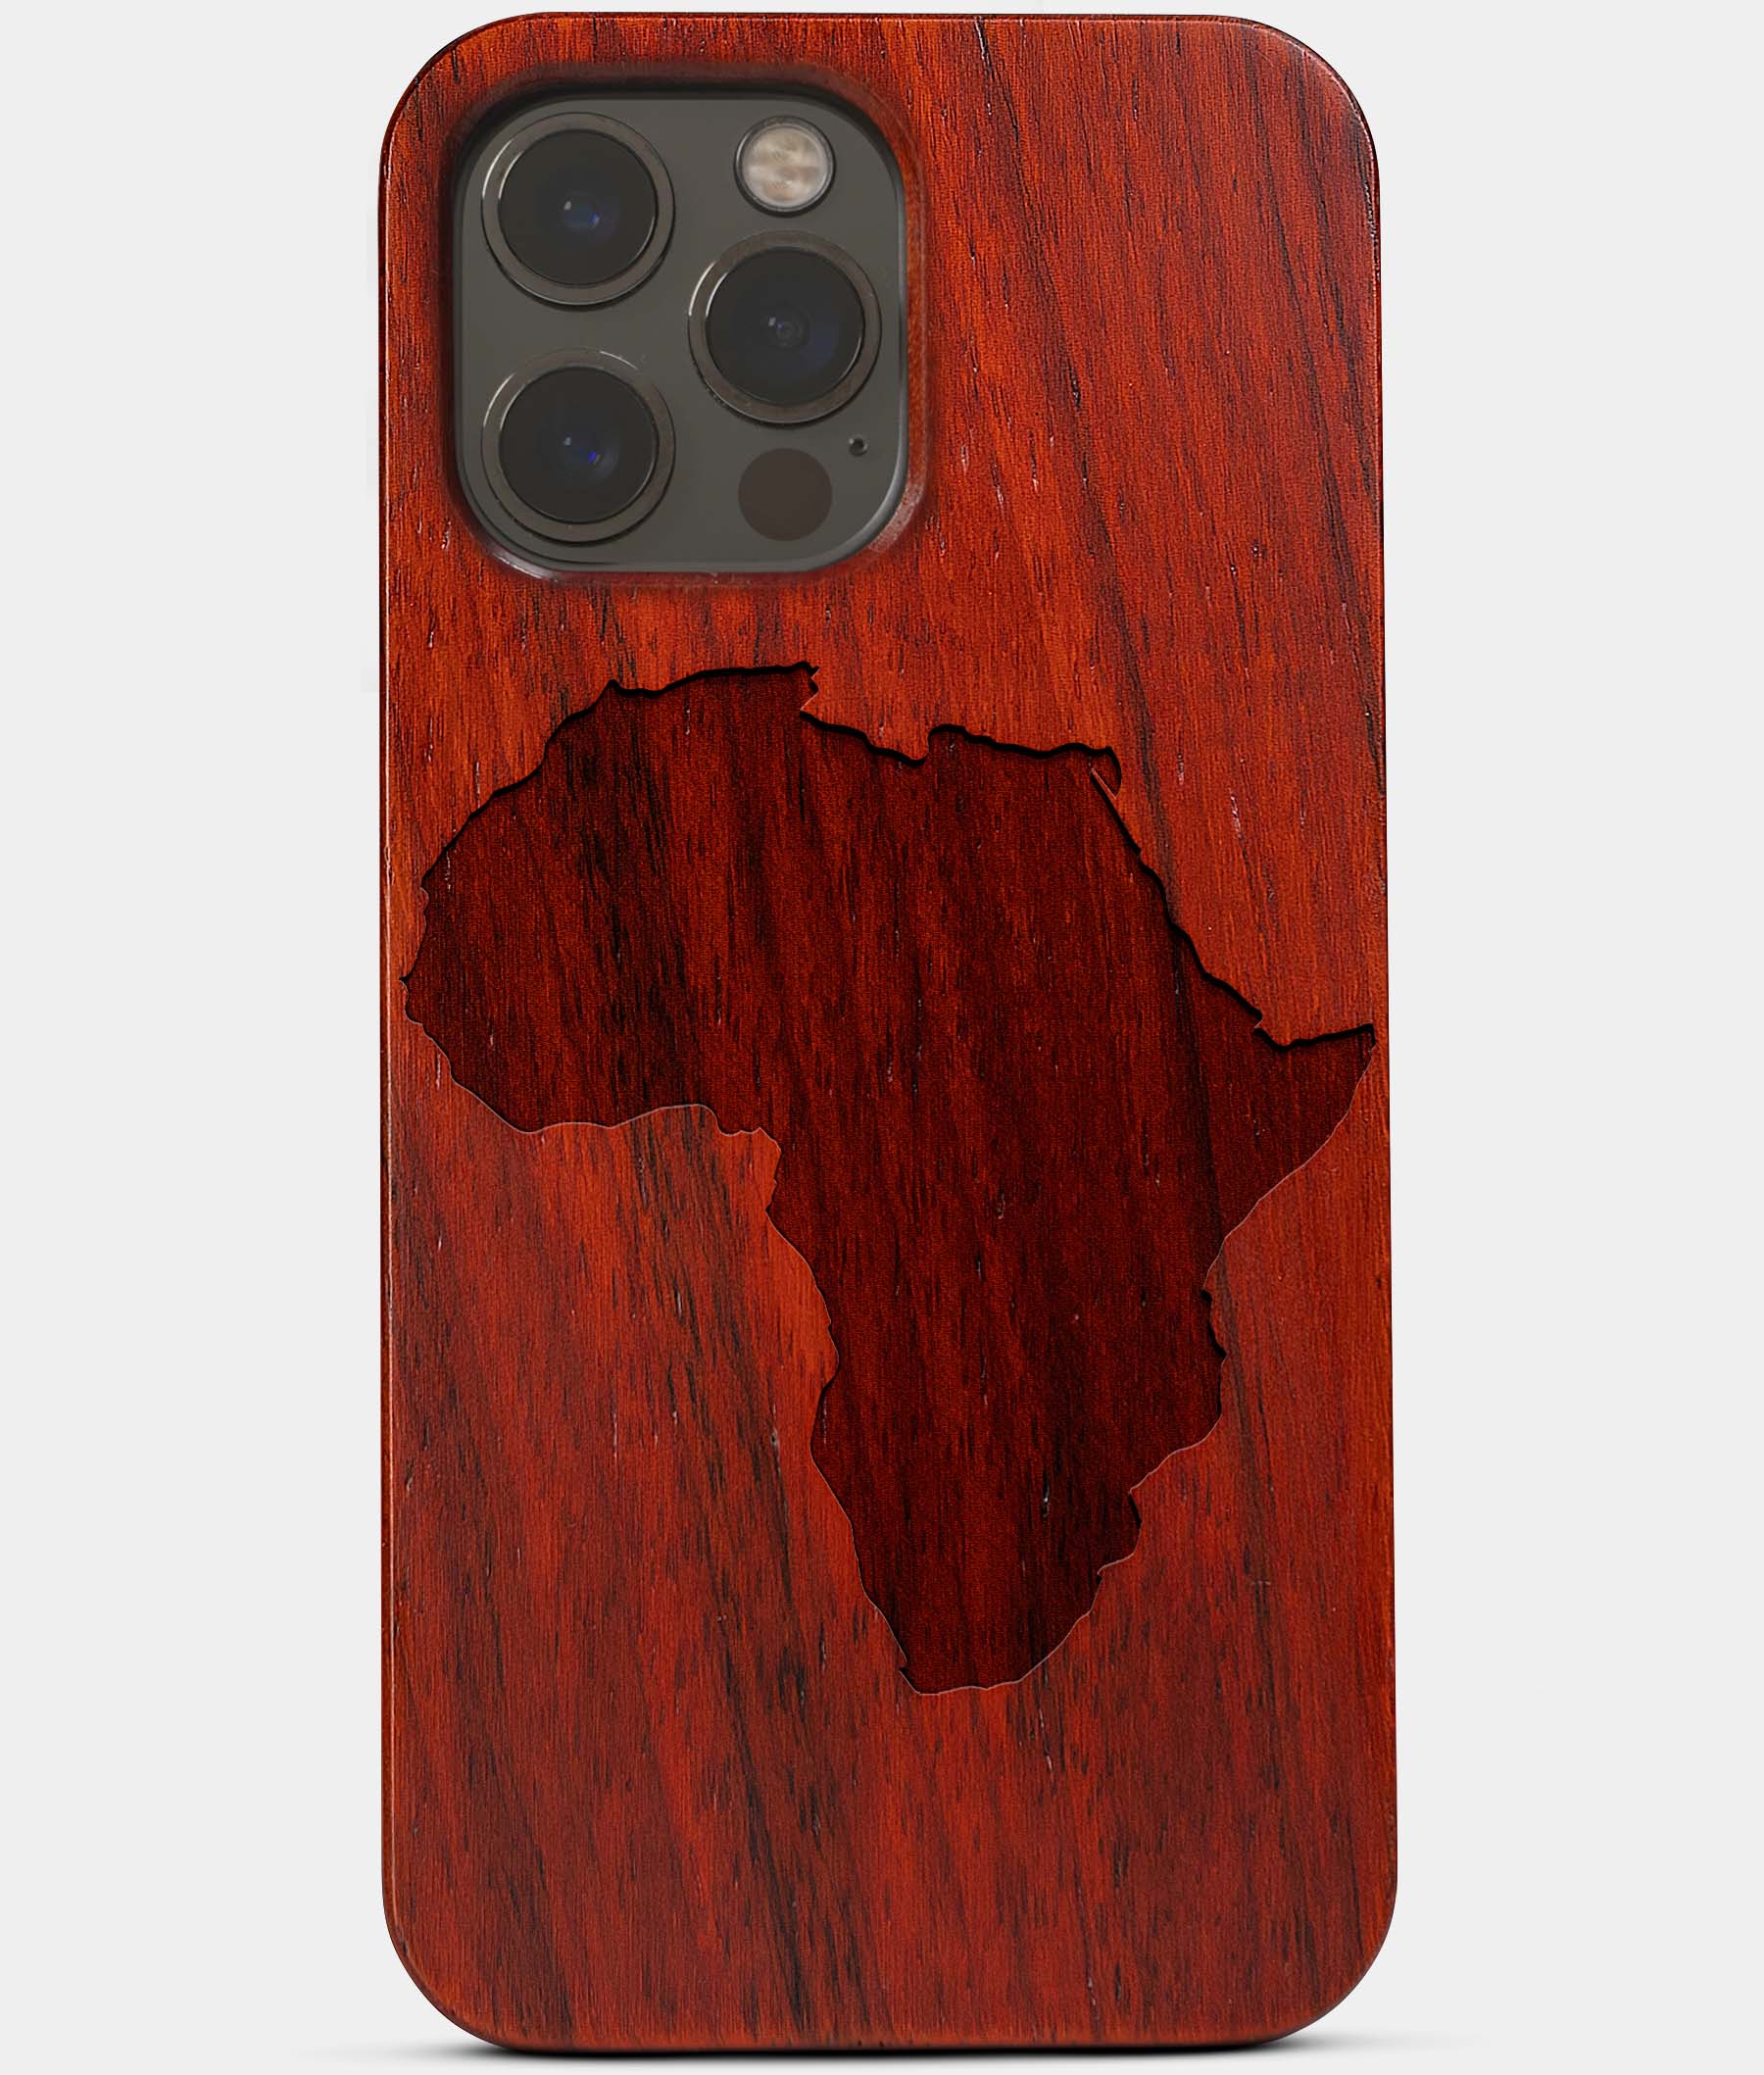 Custom Africa Continent Shape Mahogany Wood iPhone Cases Black Owned Gifts 2021 Holiday Black Owned Businesses In Los Angeles 2022 Custom Gifts For Personalized Black Men